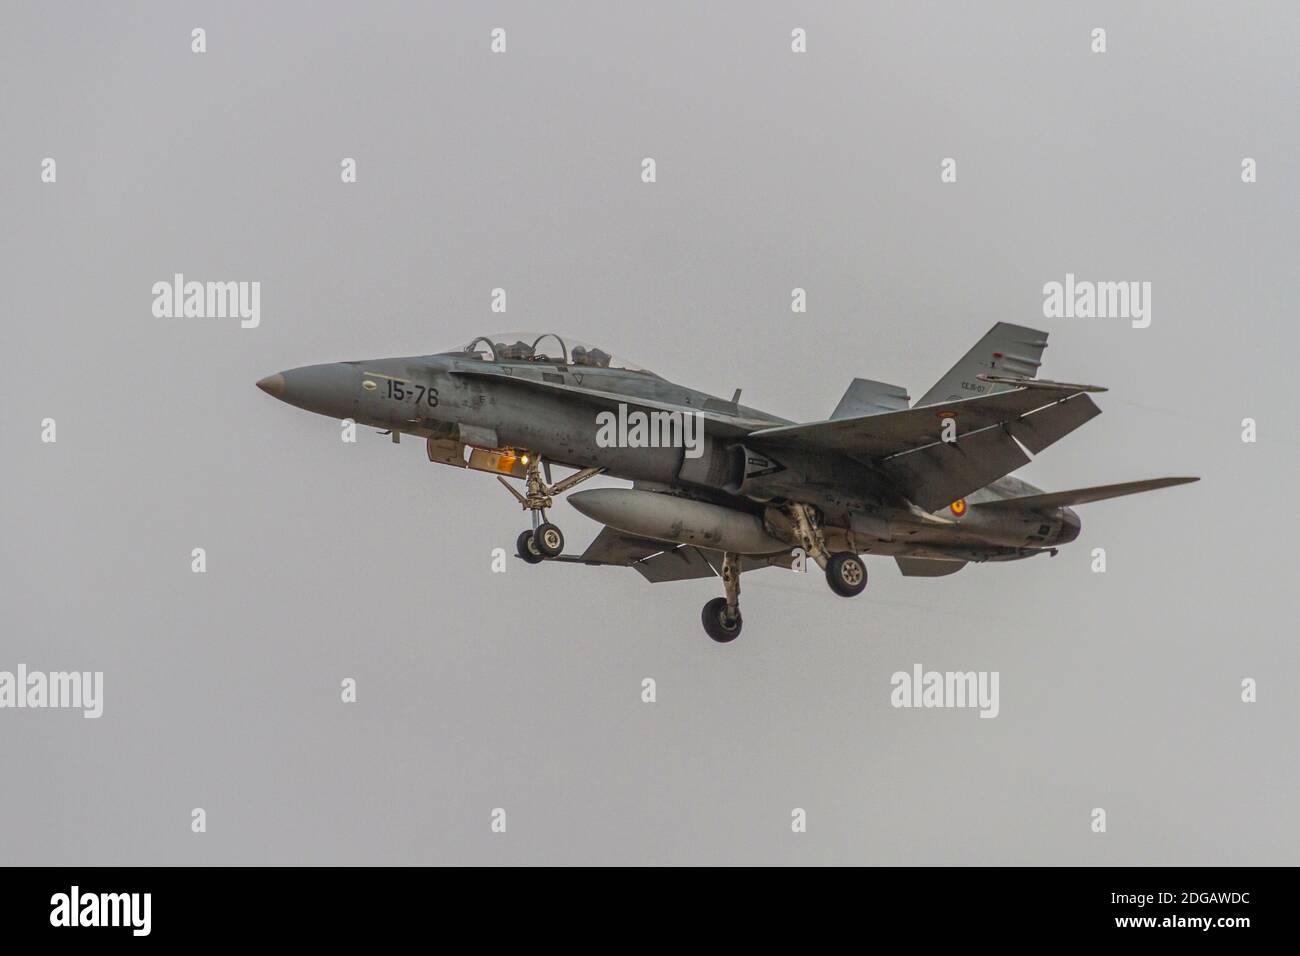 Zaragoza, SPAIN - December 1 2020 - F-A-18A + Hornet two-seater fighter plane belonging to the Zaragoza military base of the Spanish air force on trai Stock Photo